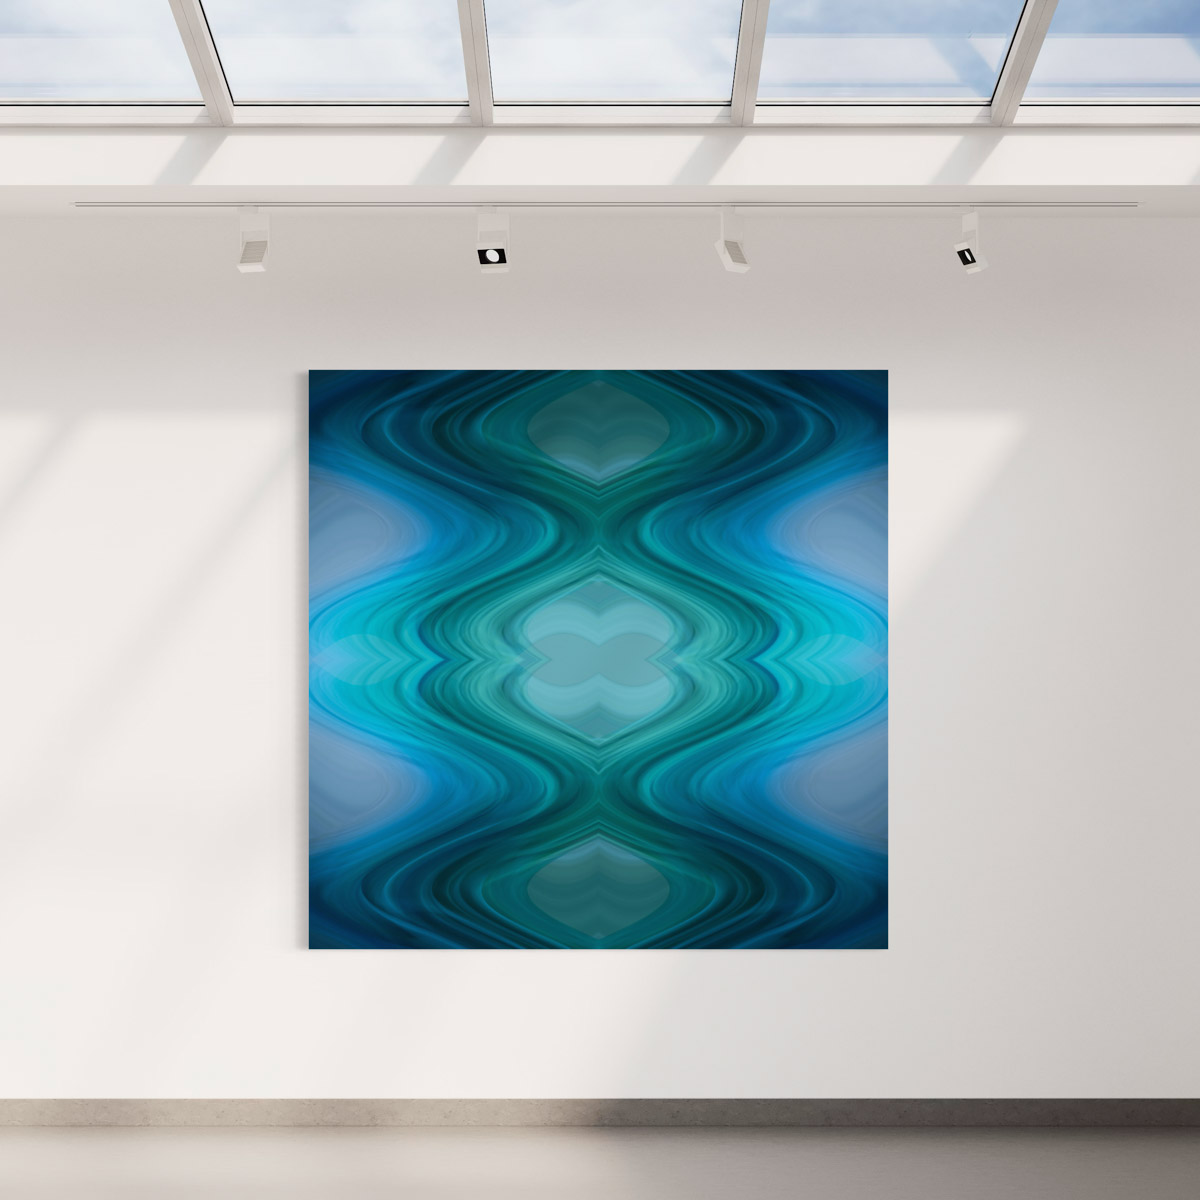 A large blue abstract painting hanging on the wall.